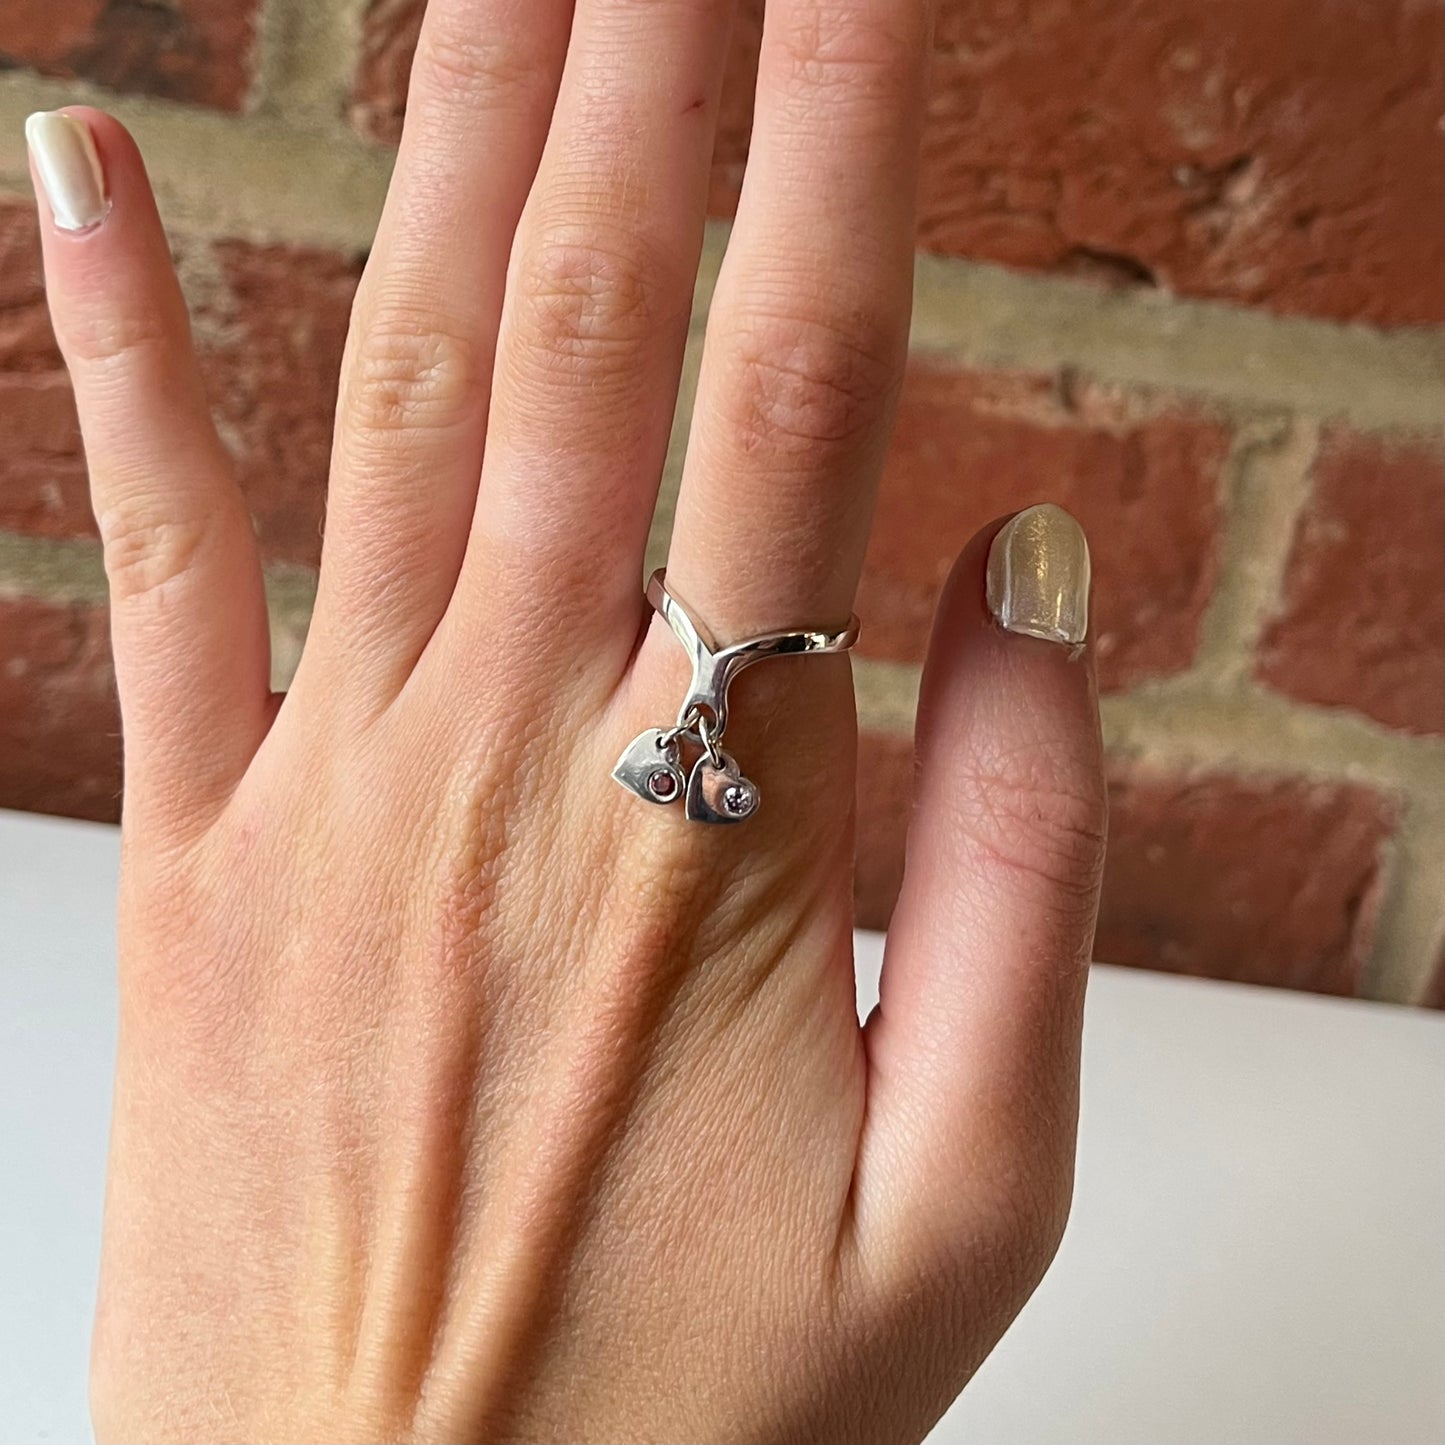 ‘Together Forever’ ring in Silver